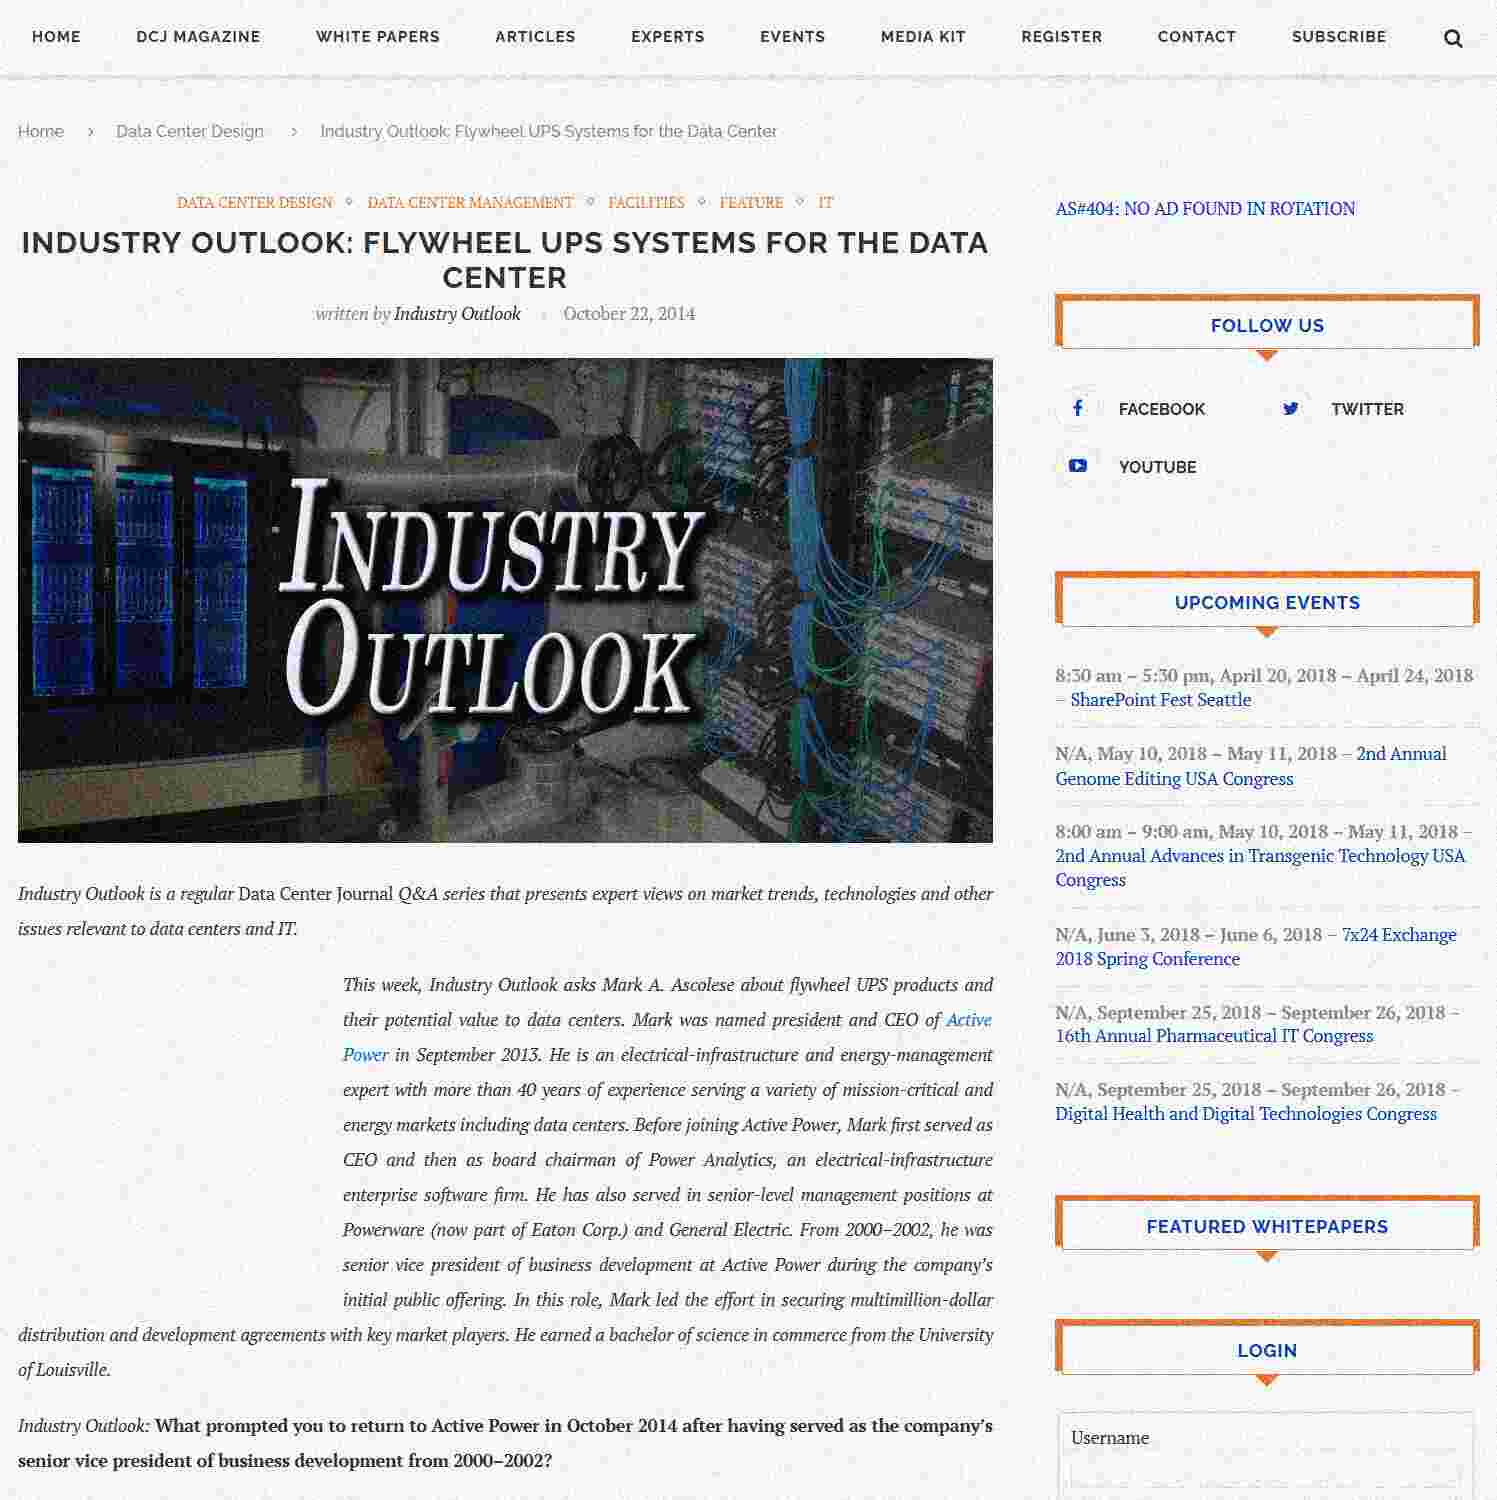 Illustration of Industry Outlook: Flywheel UPS Systems for the Data Center